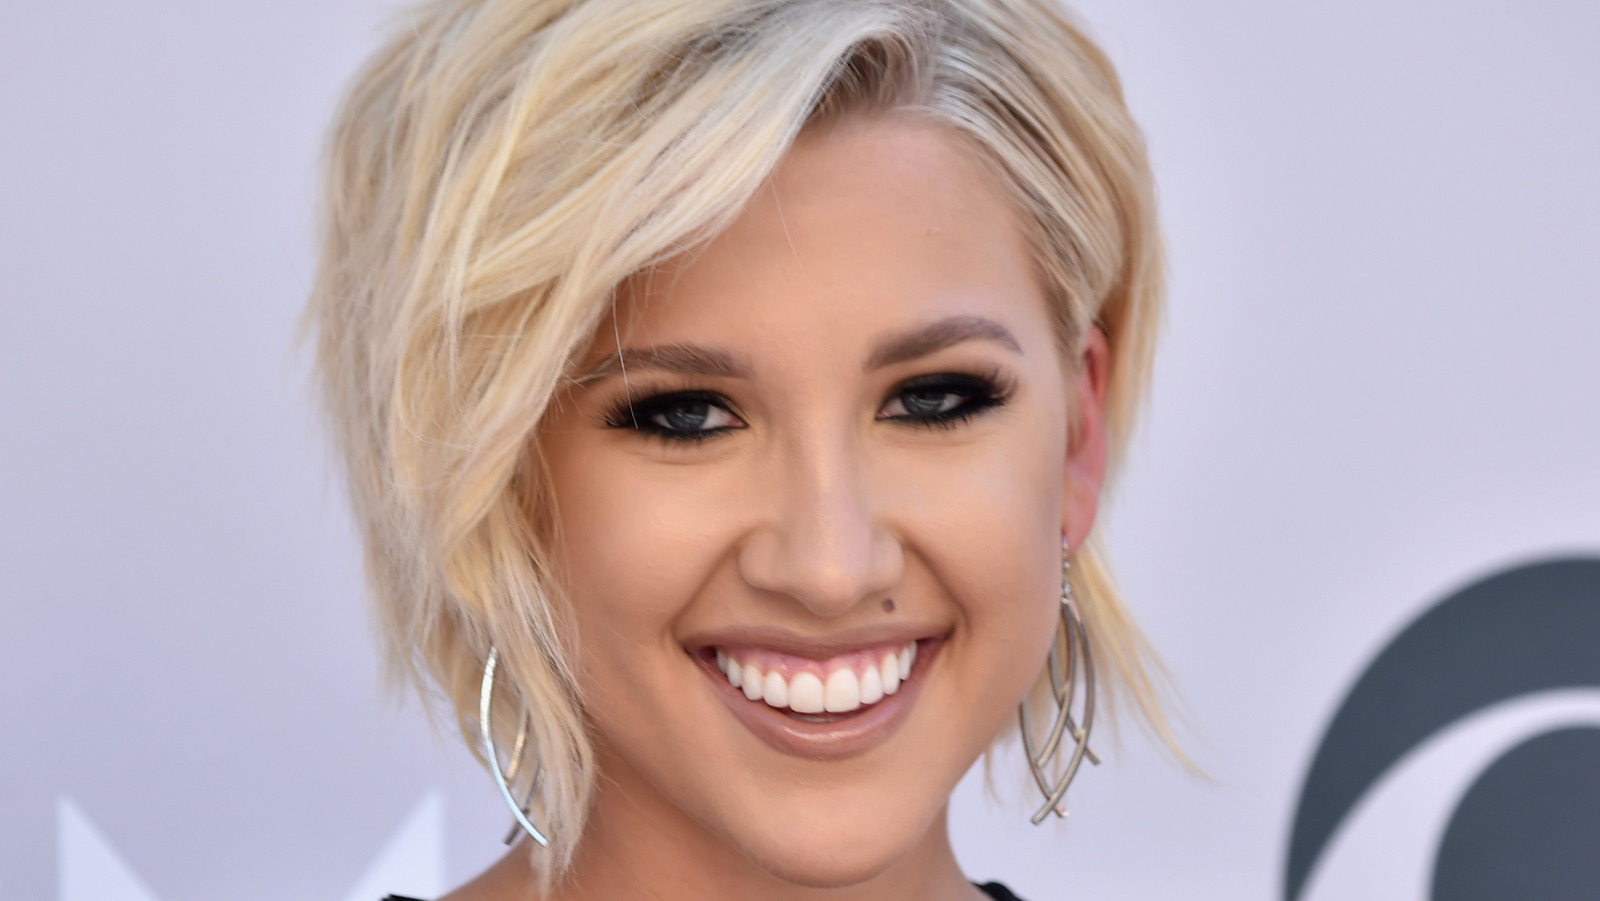 Naked pictures of savannah chrisley